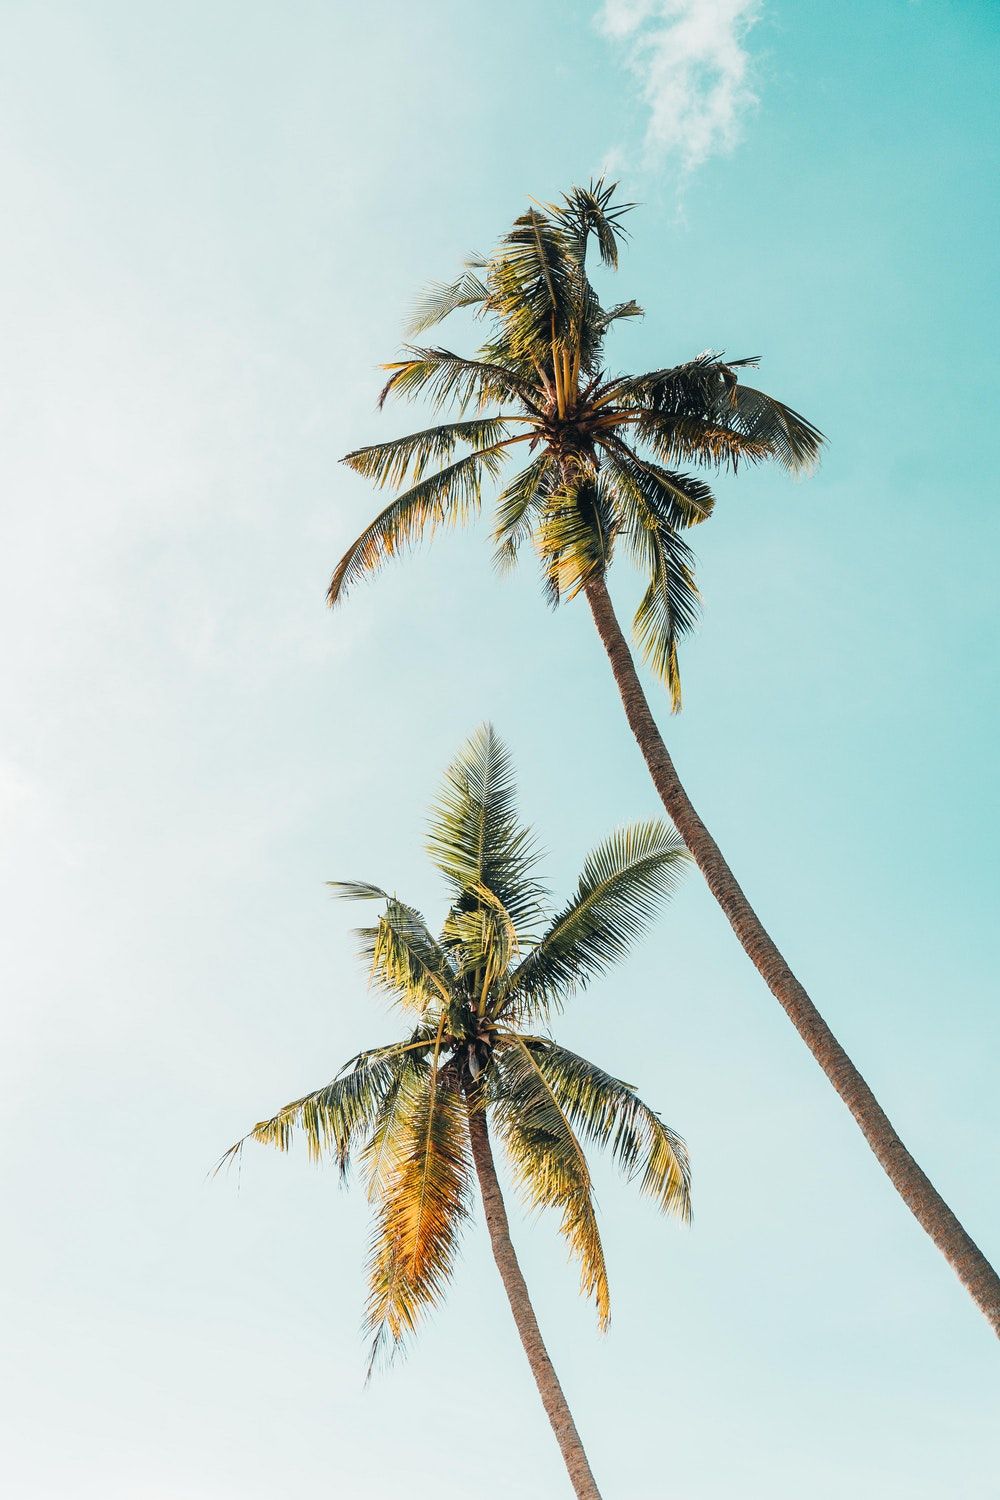 Aesthetic palm trees wallpapers